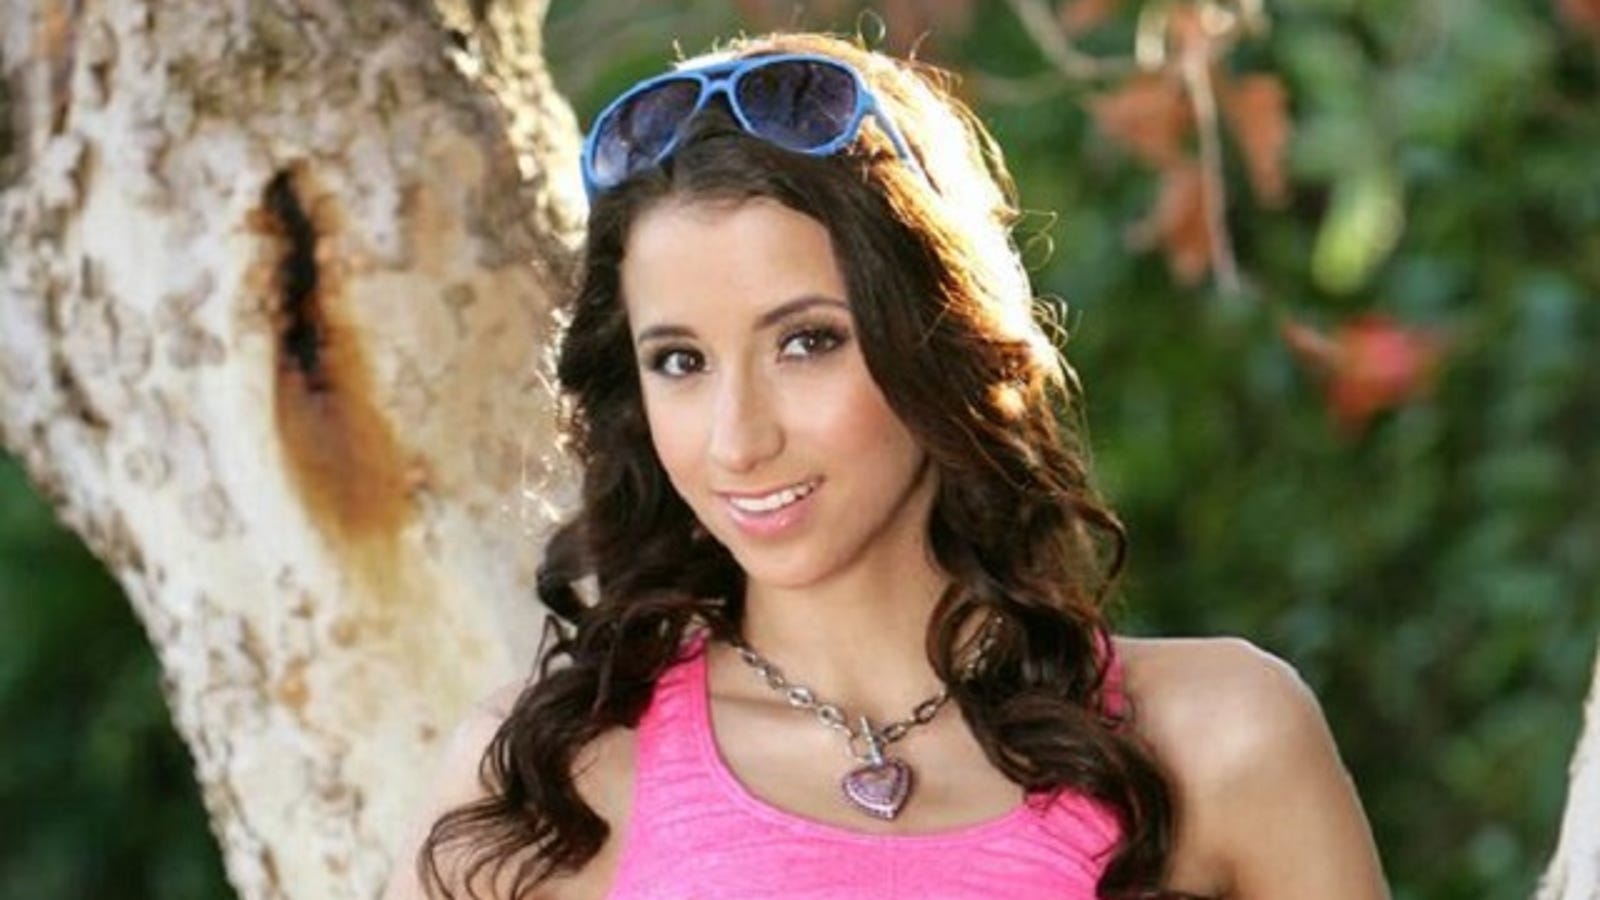 Meet Belle Knox The Duke Porn Star As You Might Have Heard